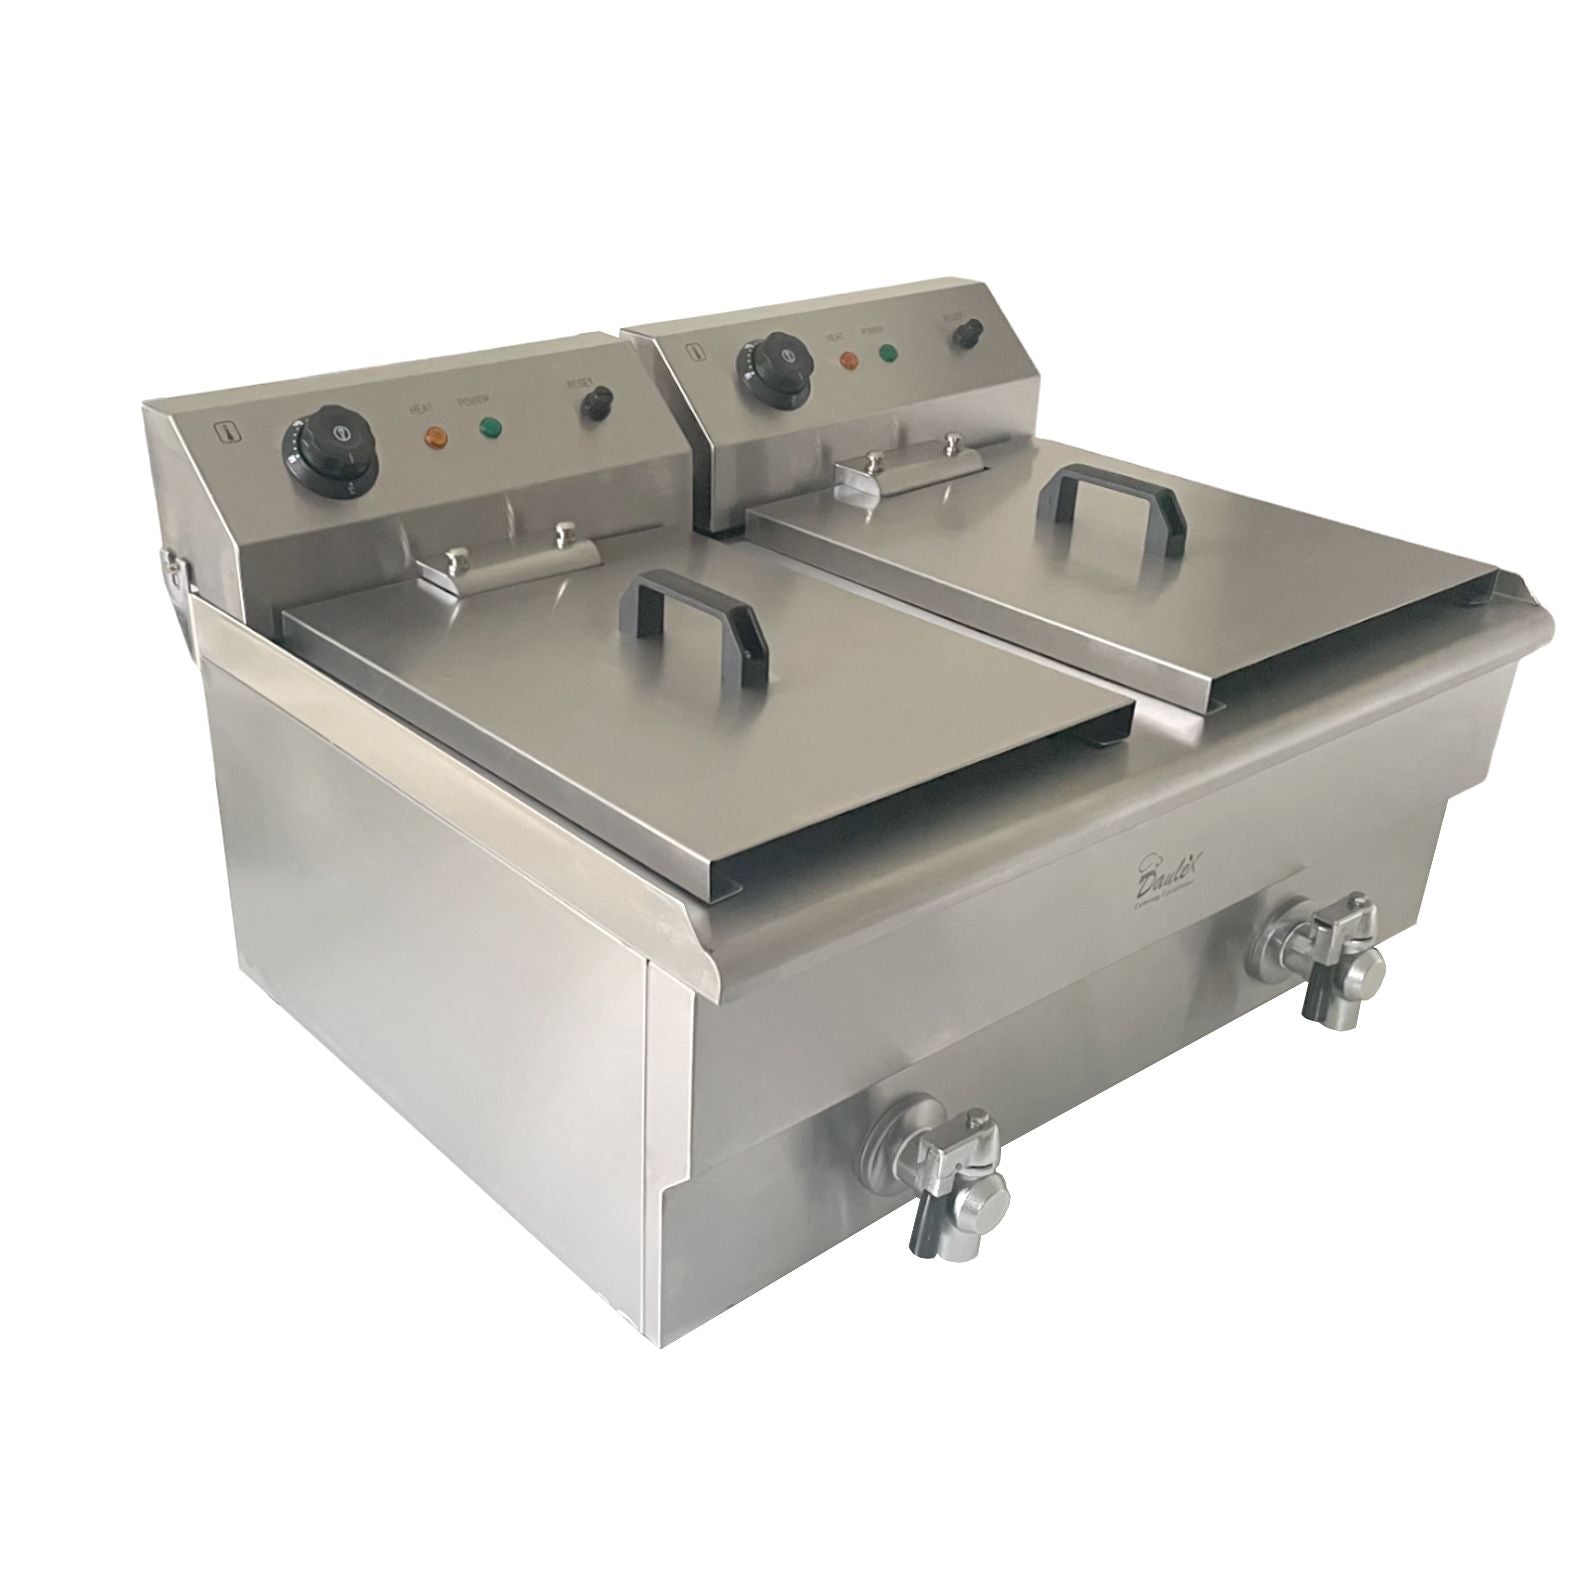 Davlex stainless steel double 13 litre electric fryer angled